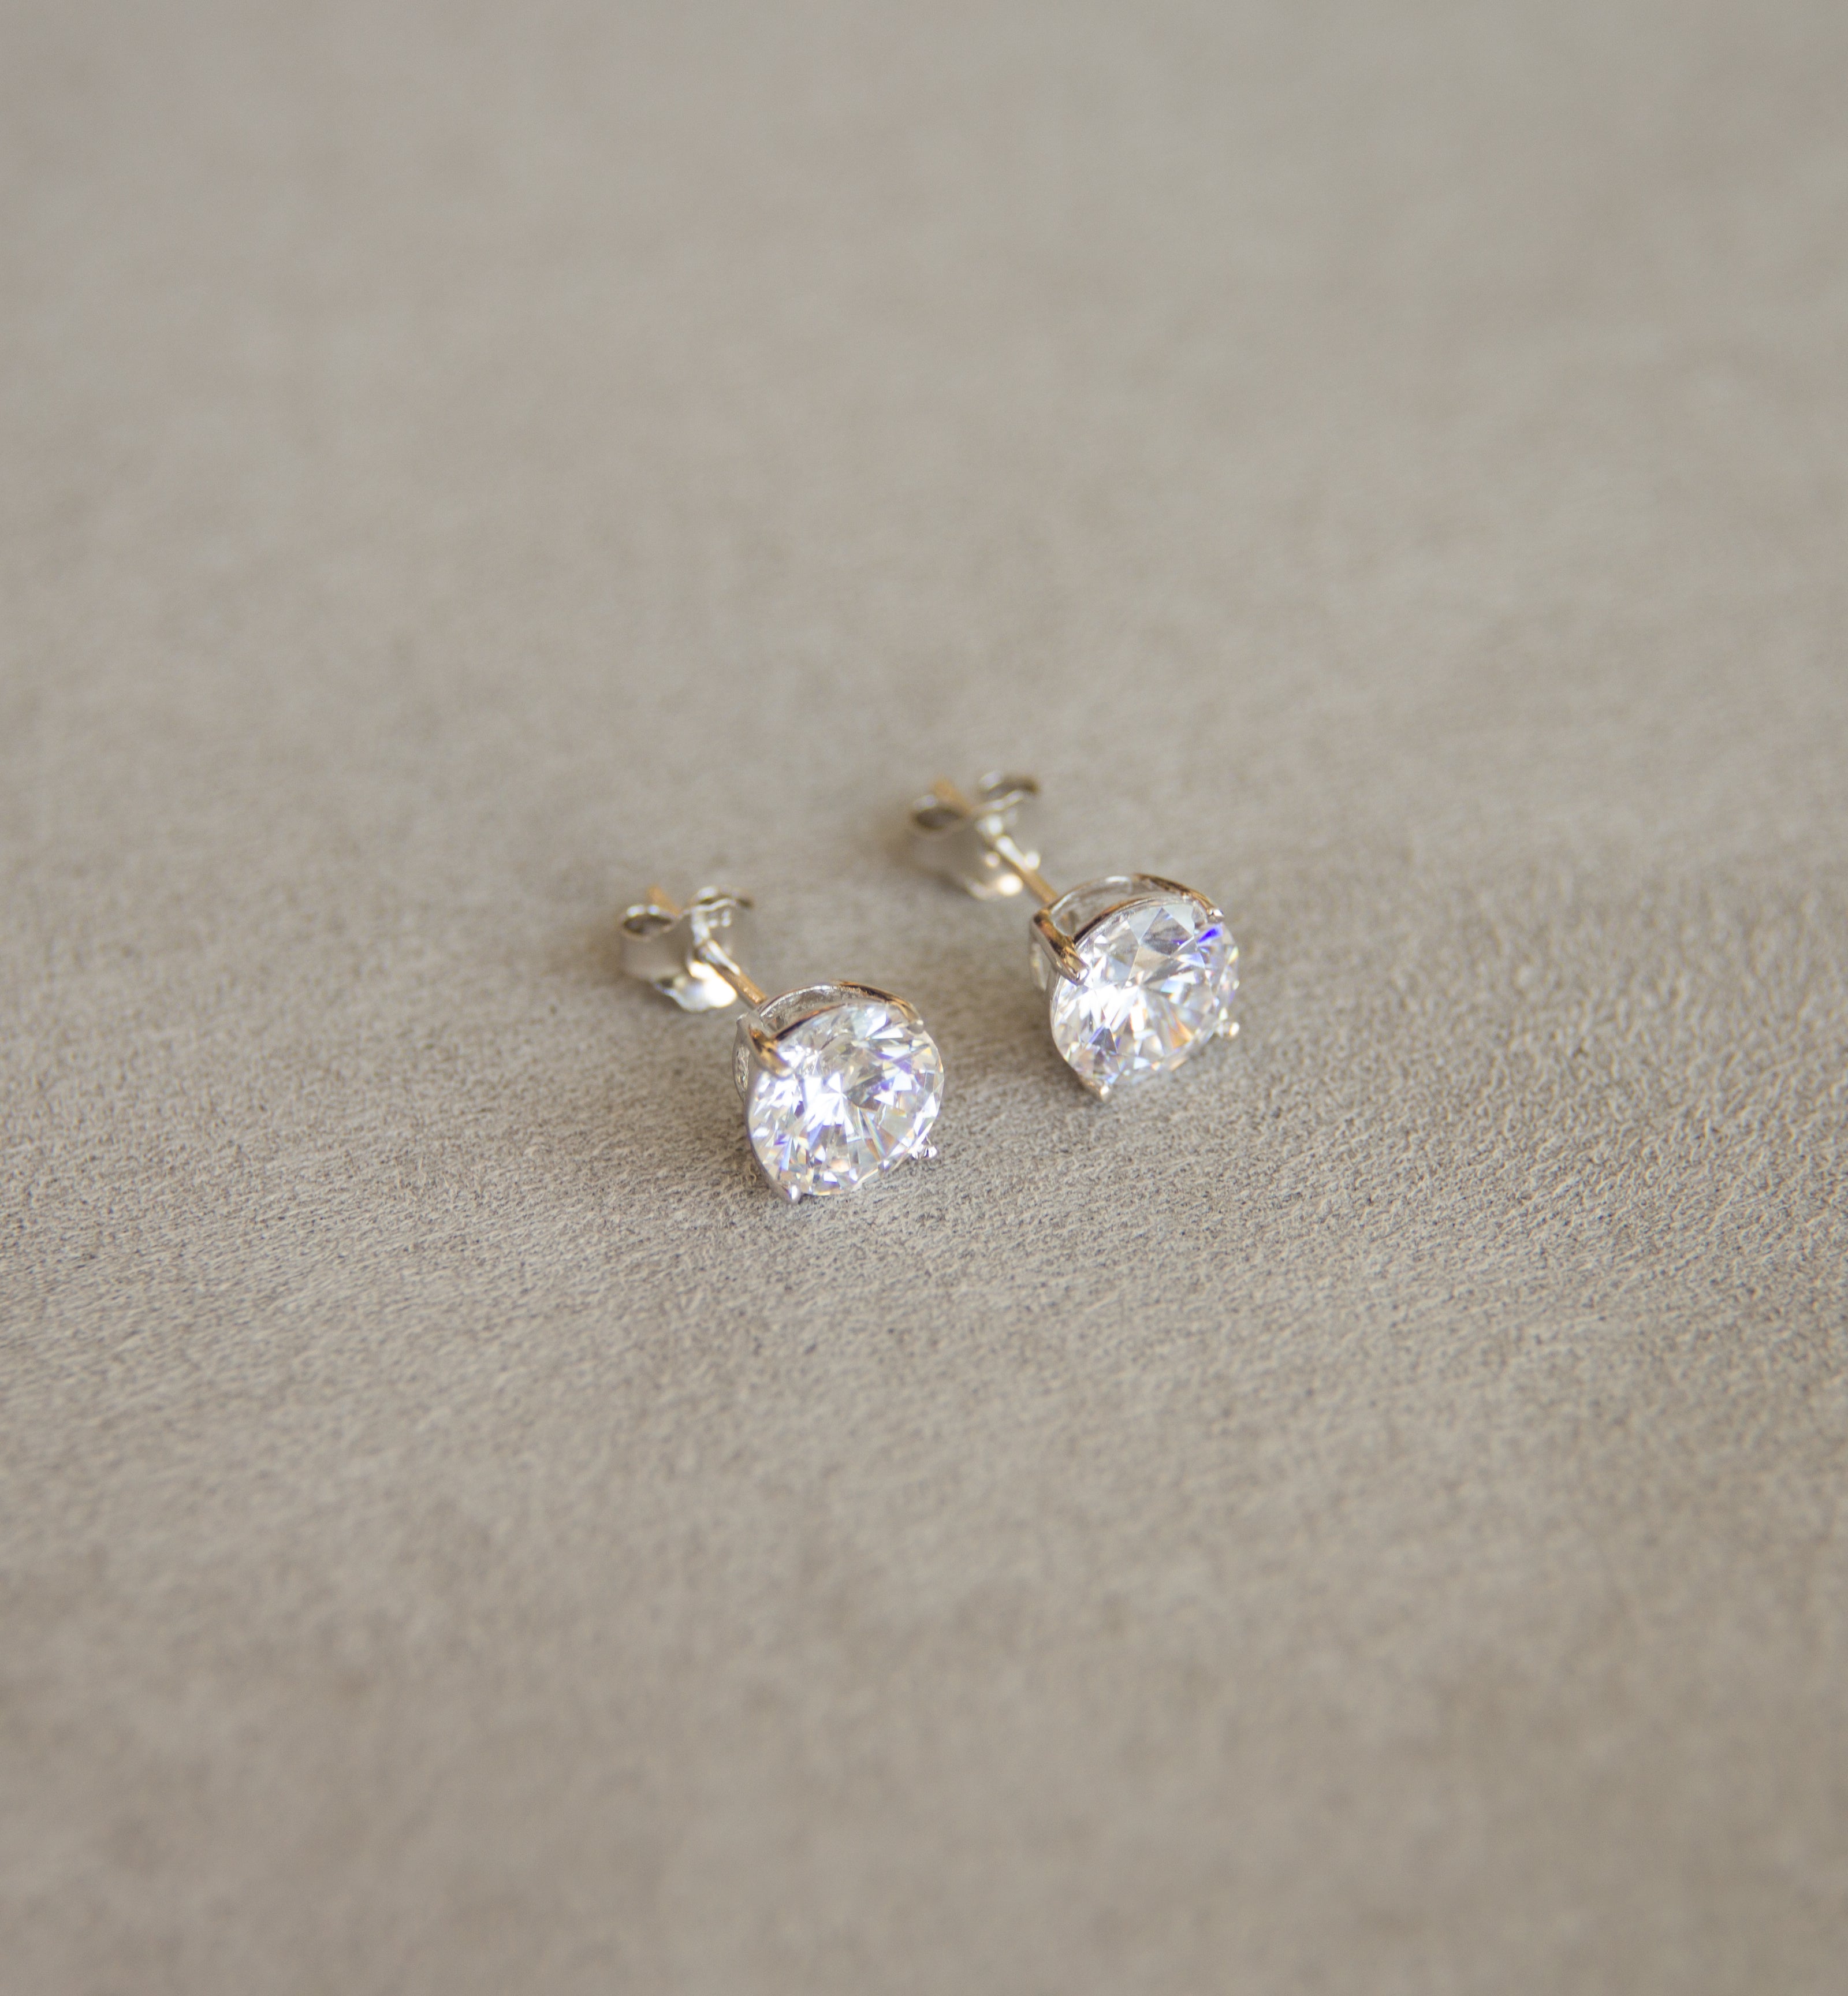 Silver 925 Solitaire Earrings